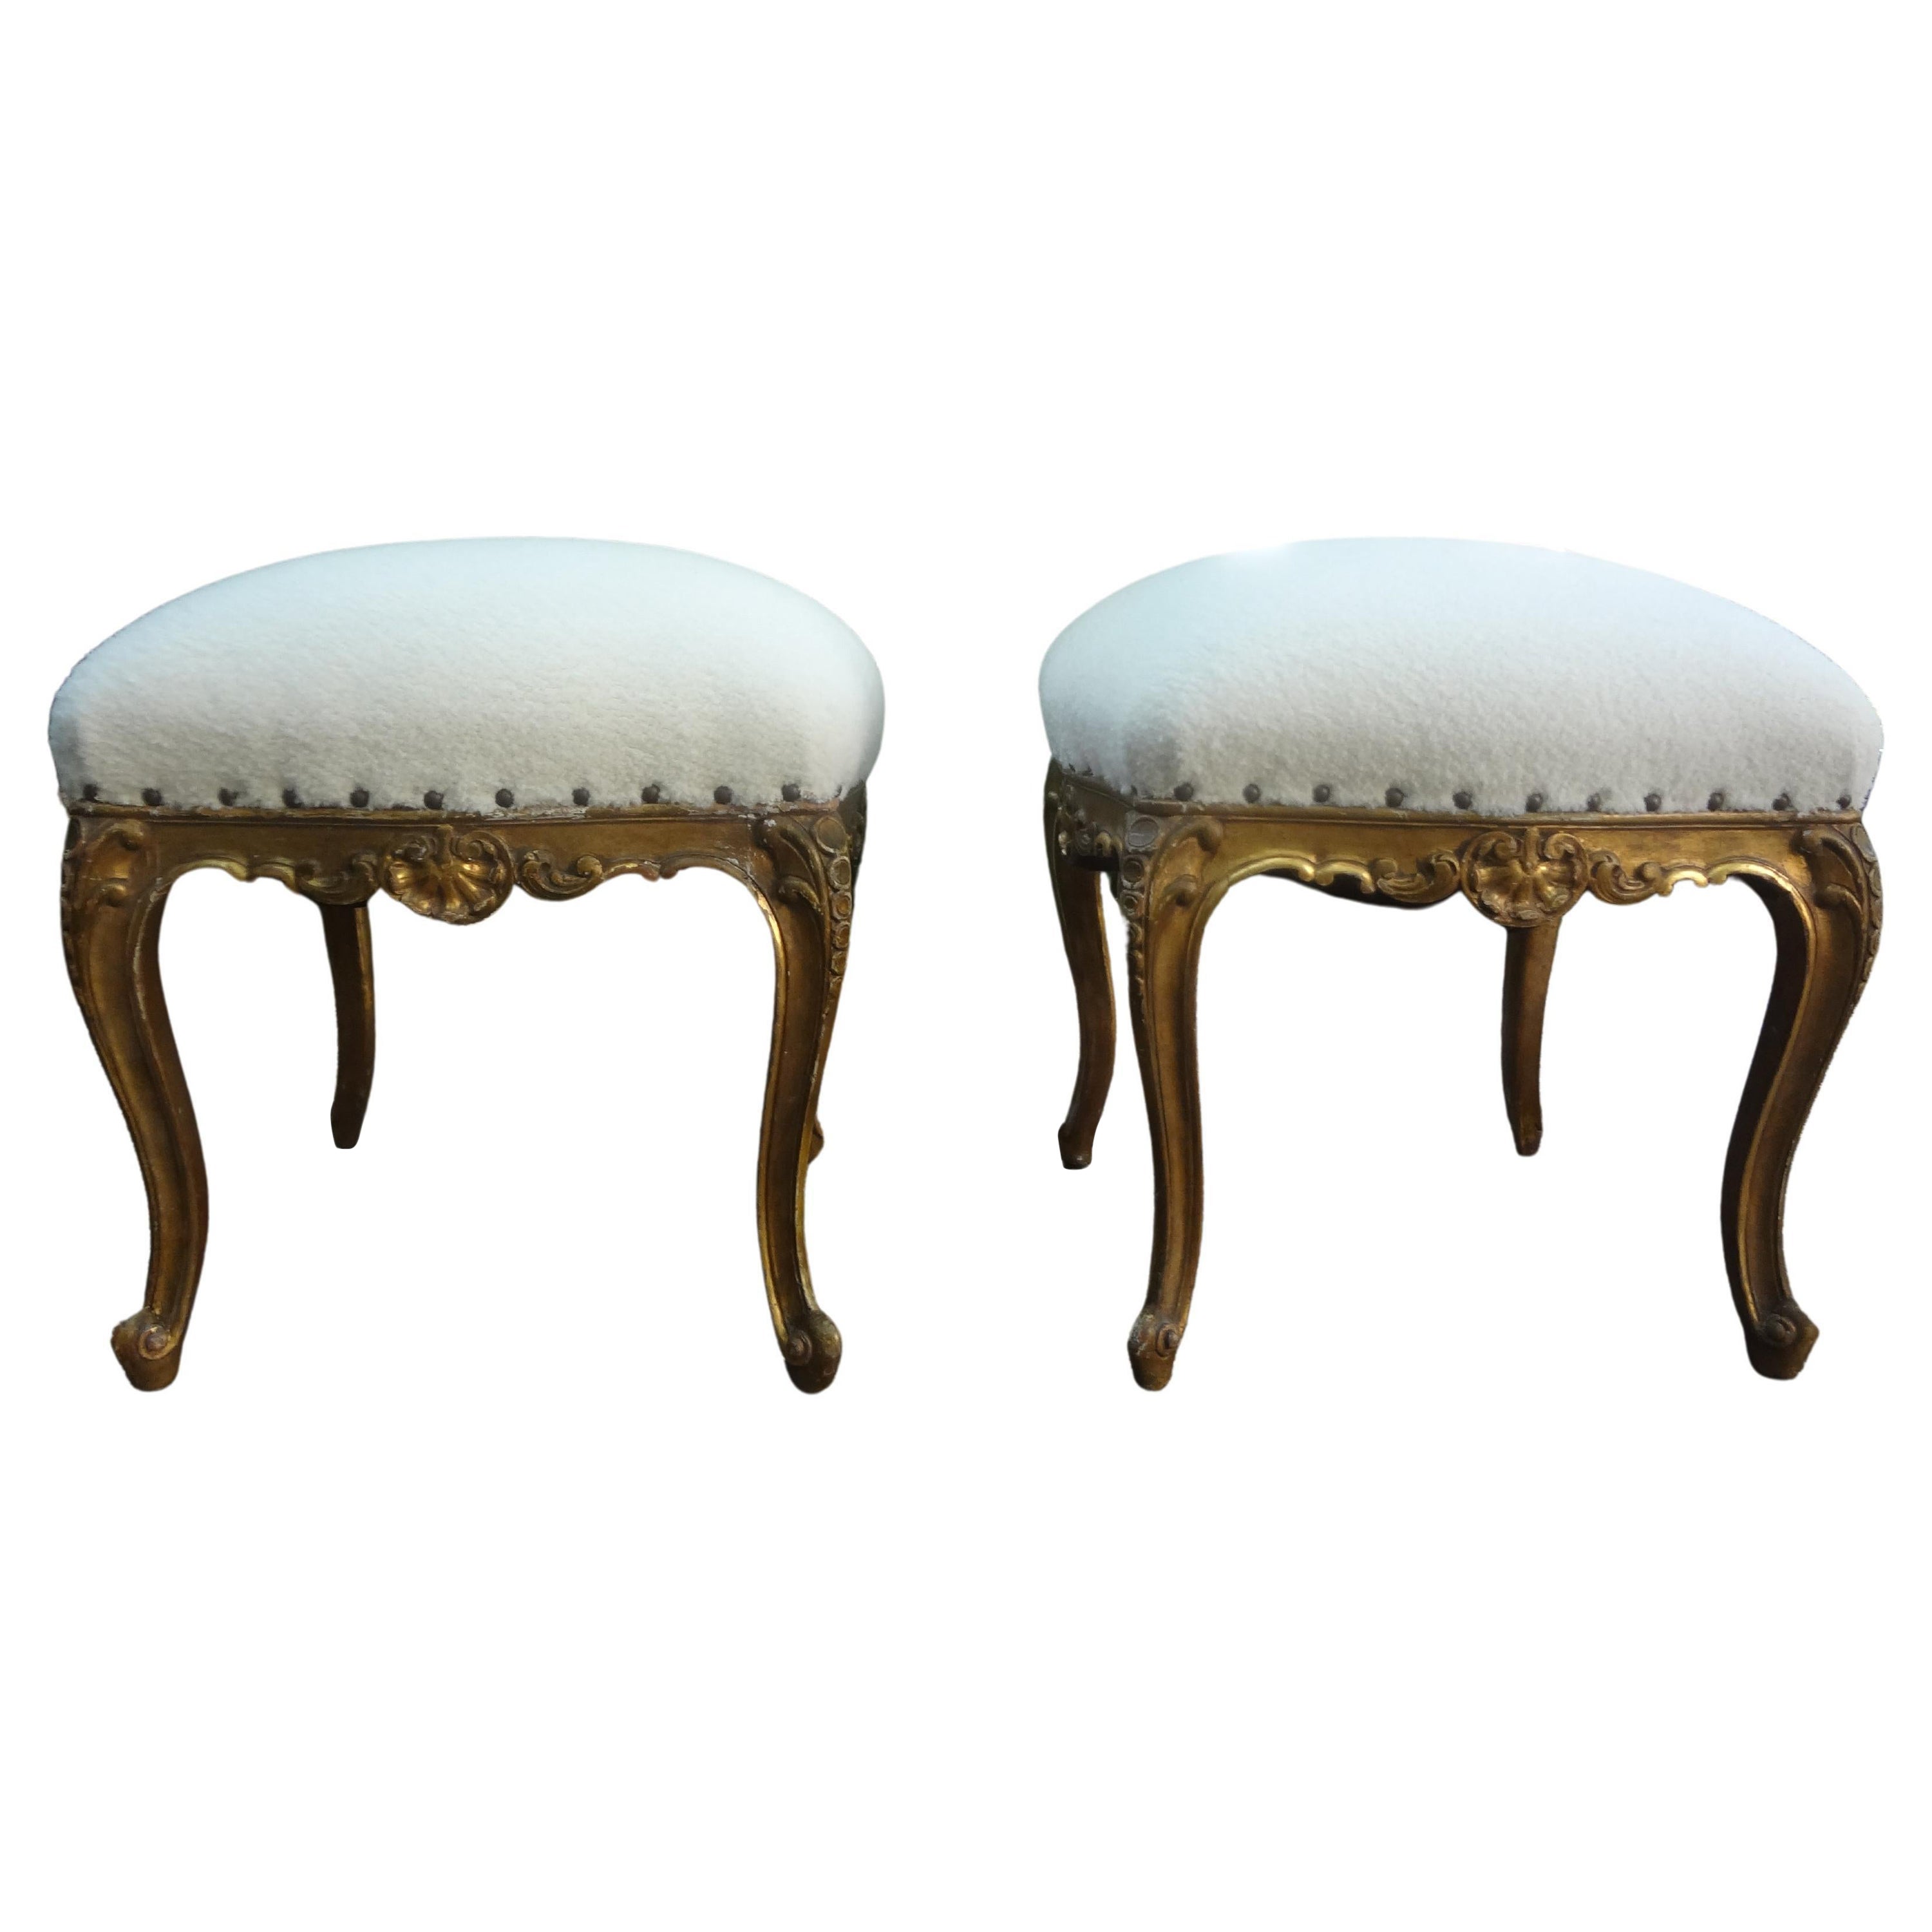 Pair Of 19th Century French Regence Style Giltwood Ottomans Or Benches For Sale